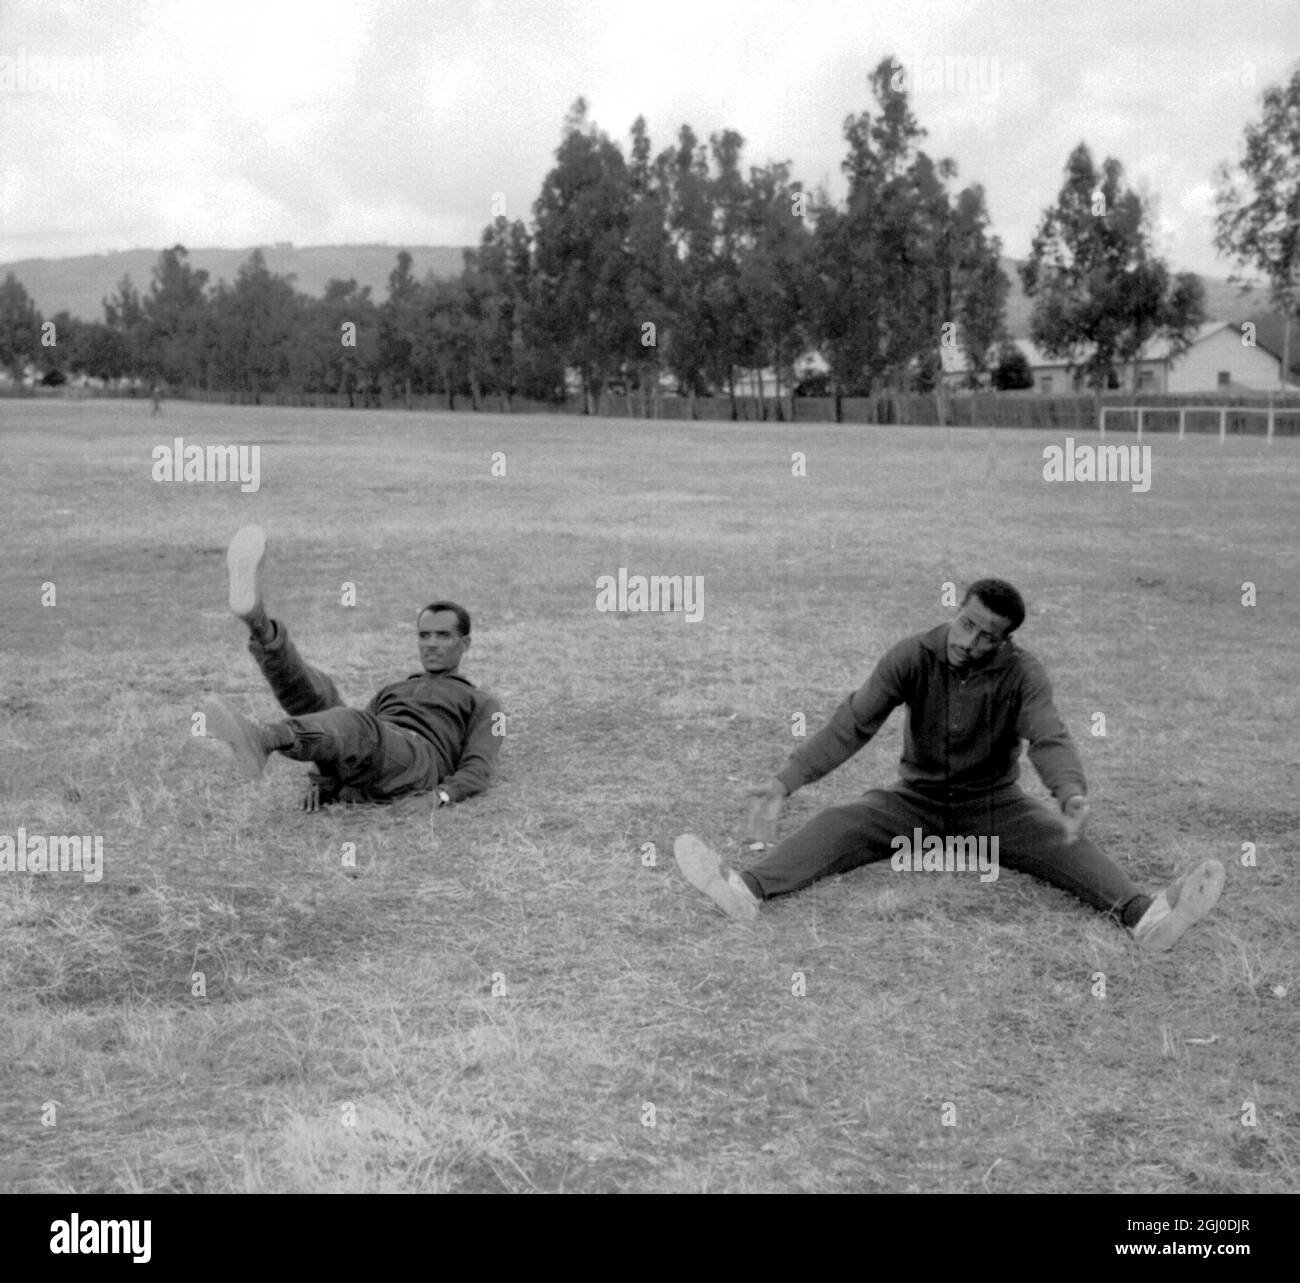 Olympic games marathon winner of the Rome, 1960 games, Ethiopia's Abebe Bikila (right) is pictured undergoing physical training exercises in Addis Ababa, Ethiopia. With him is Mamo Wolde. They are training for next years Olympic Games which will be staged in Tokyo. 5th December 1963. Stock Photo